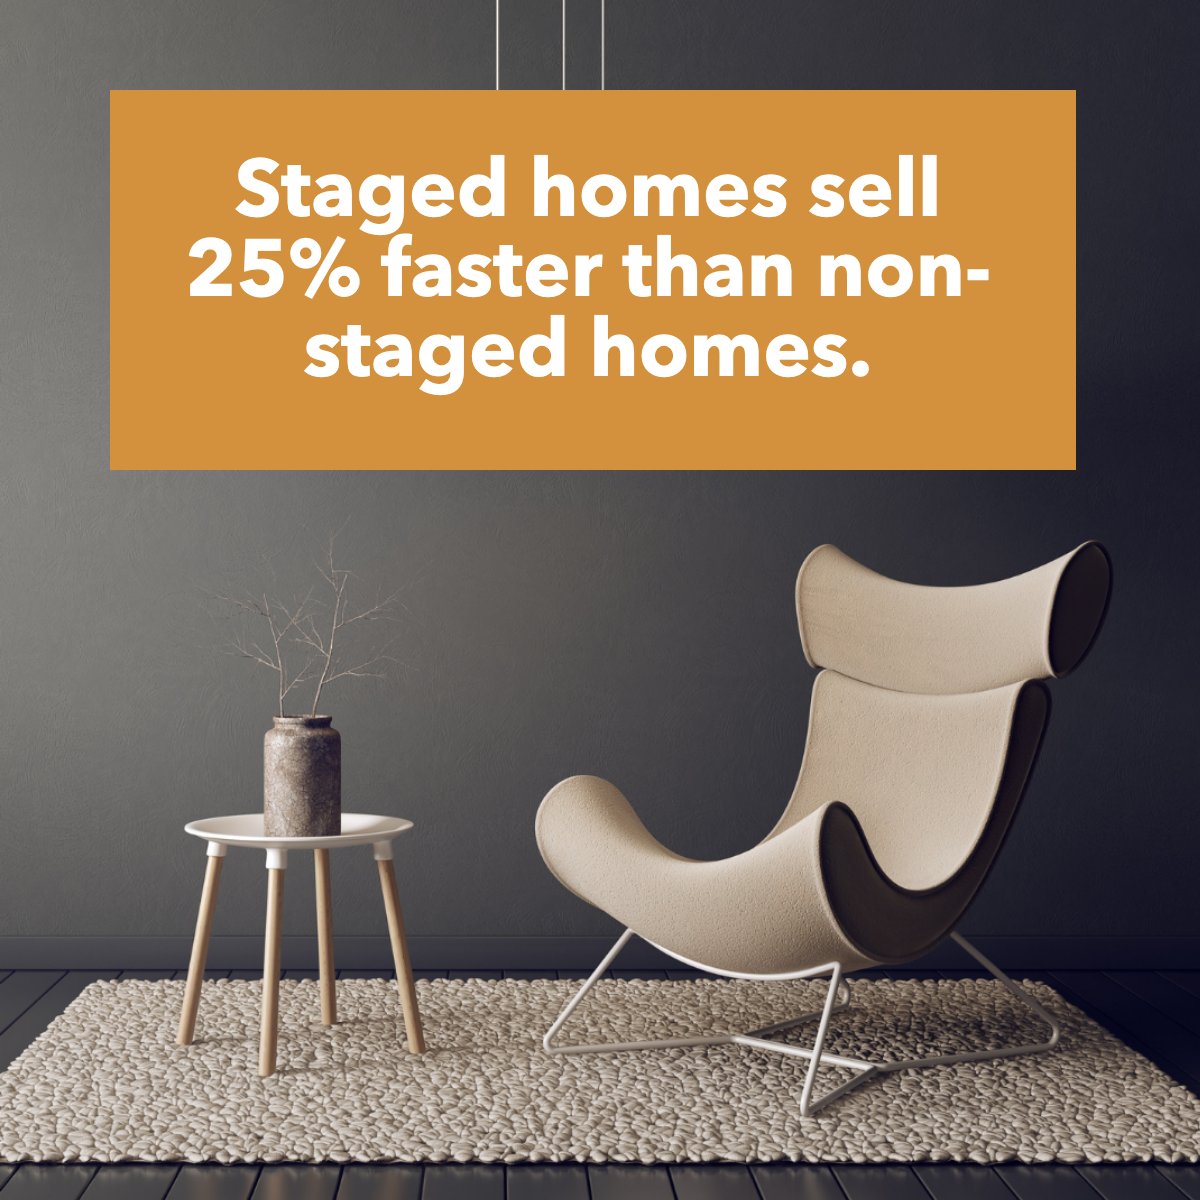 Here is a great tip if you are trying to sell your home! 🏡 #homeselling #stagedhomes #realestatefacts #realestate #cherylcitro